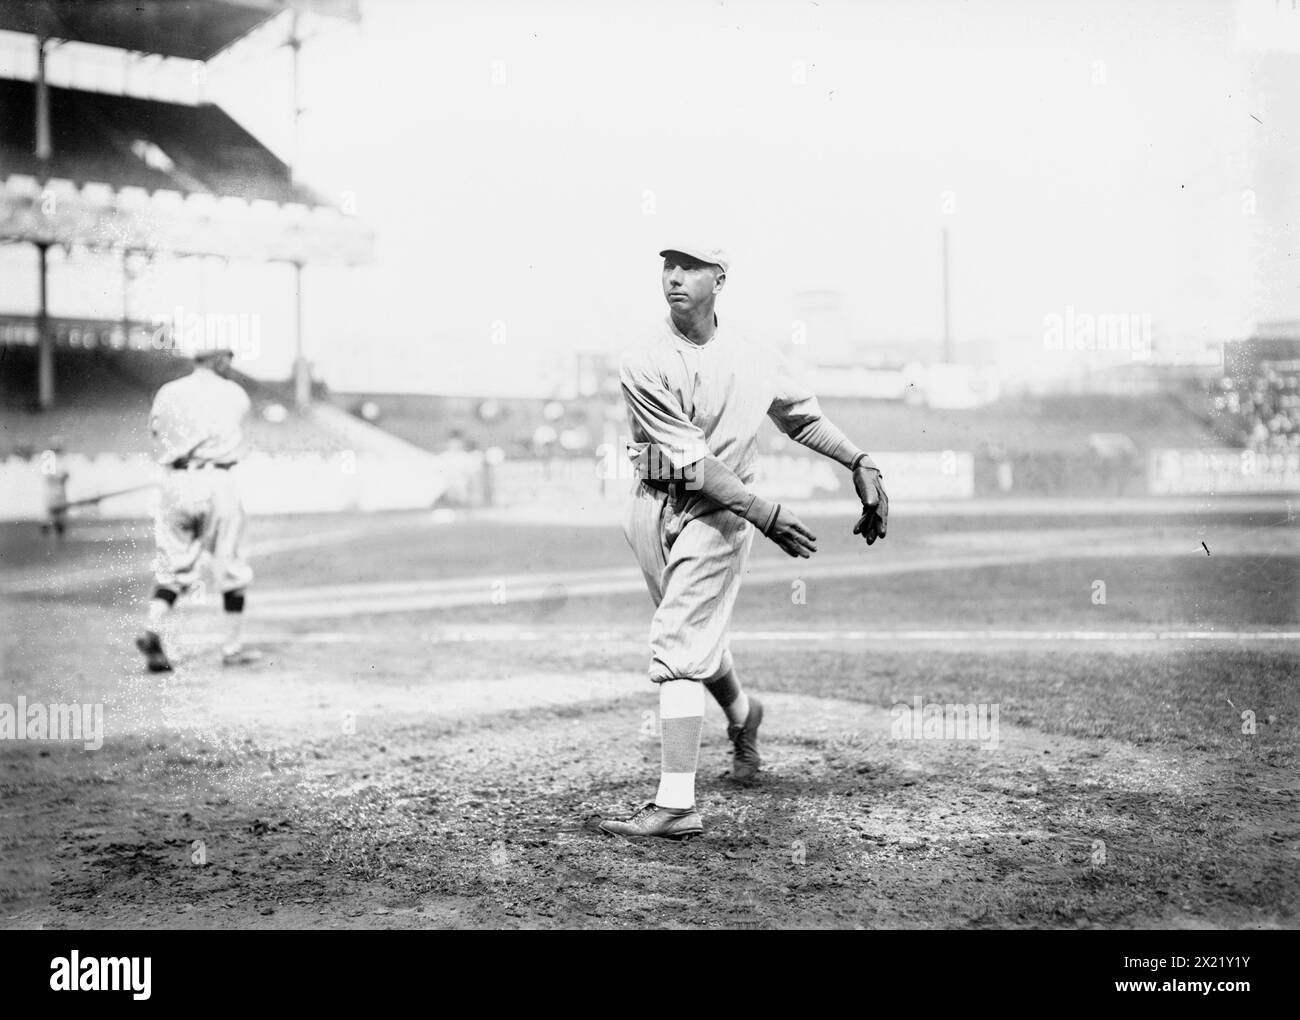 Art Fromme, New York NL, a Polo Grounds, NY (baseball), 1912. Foto Stock